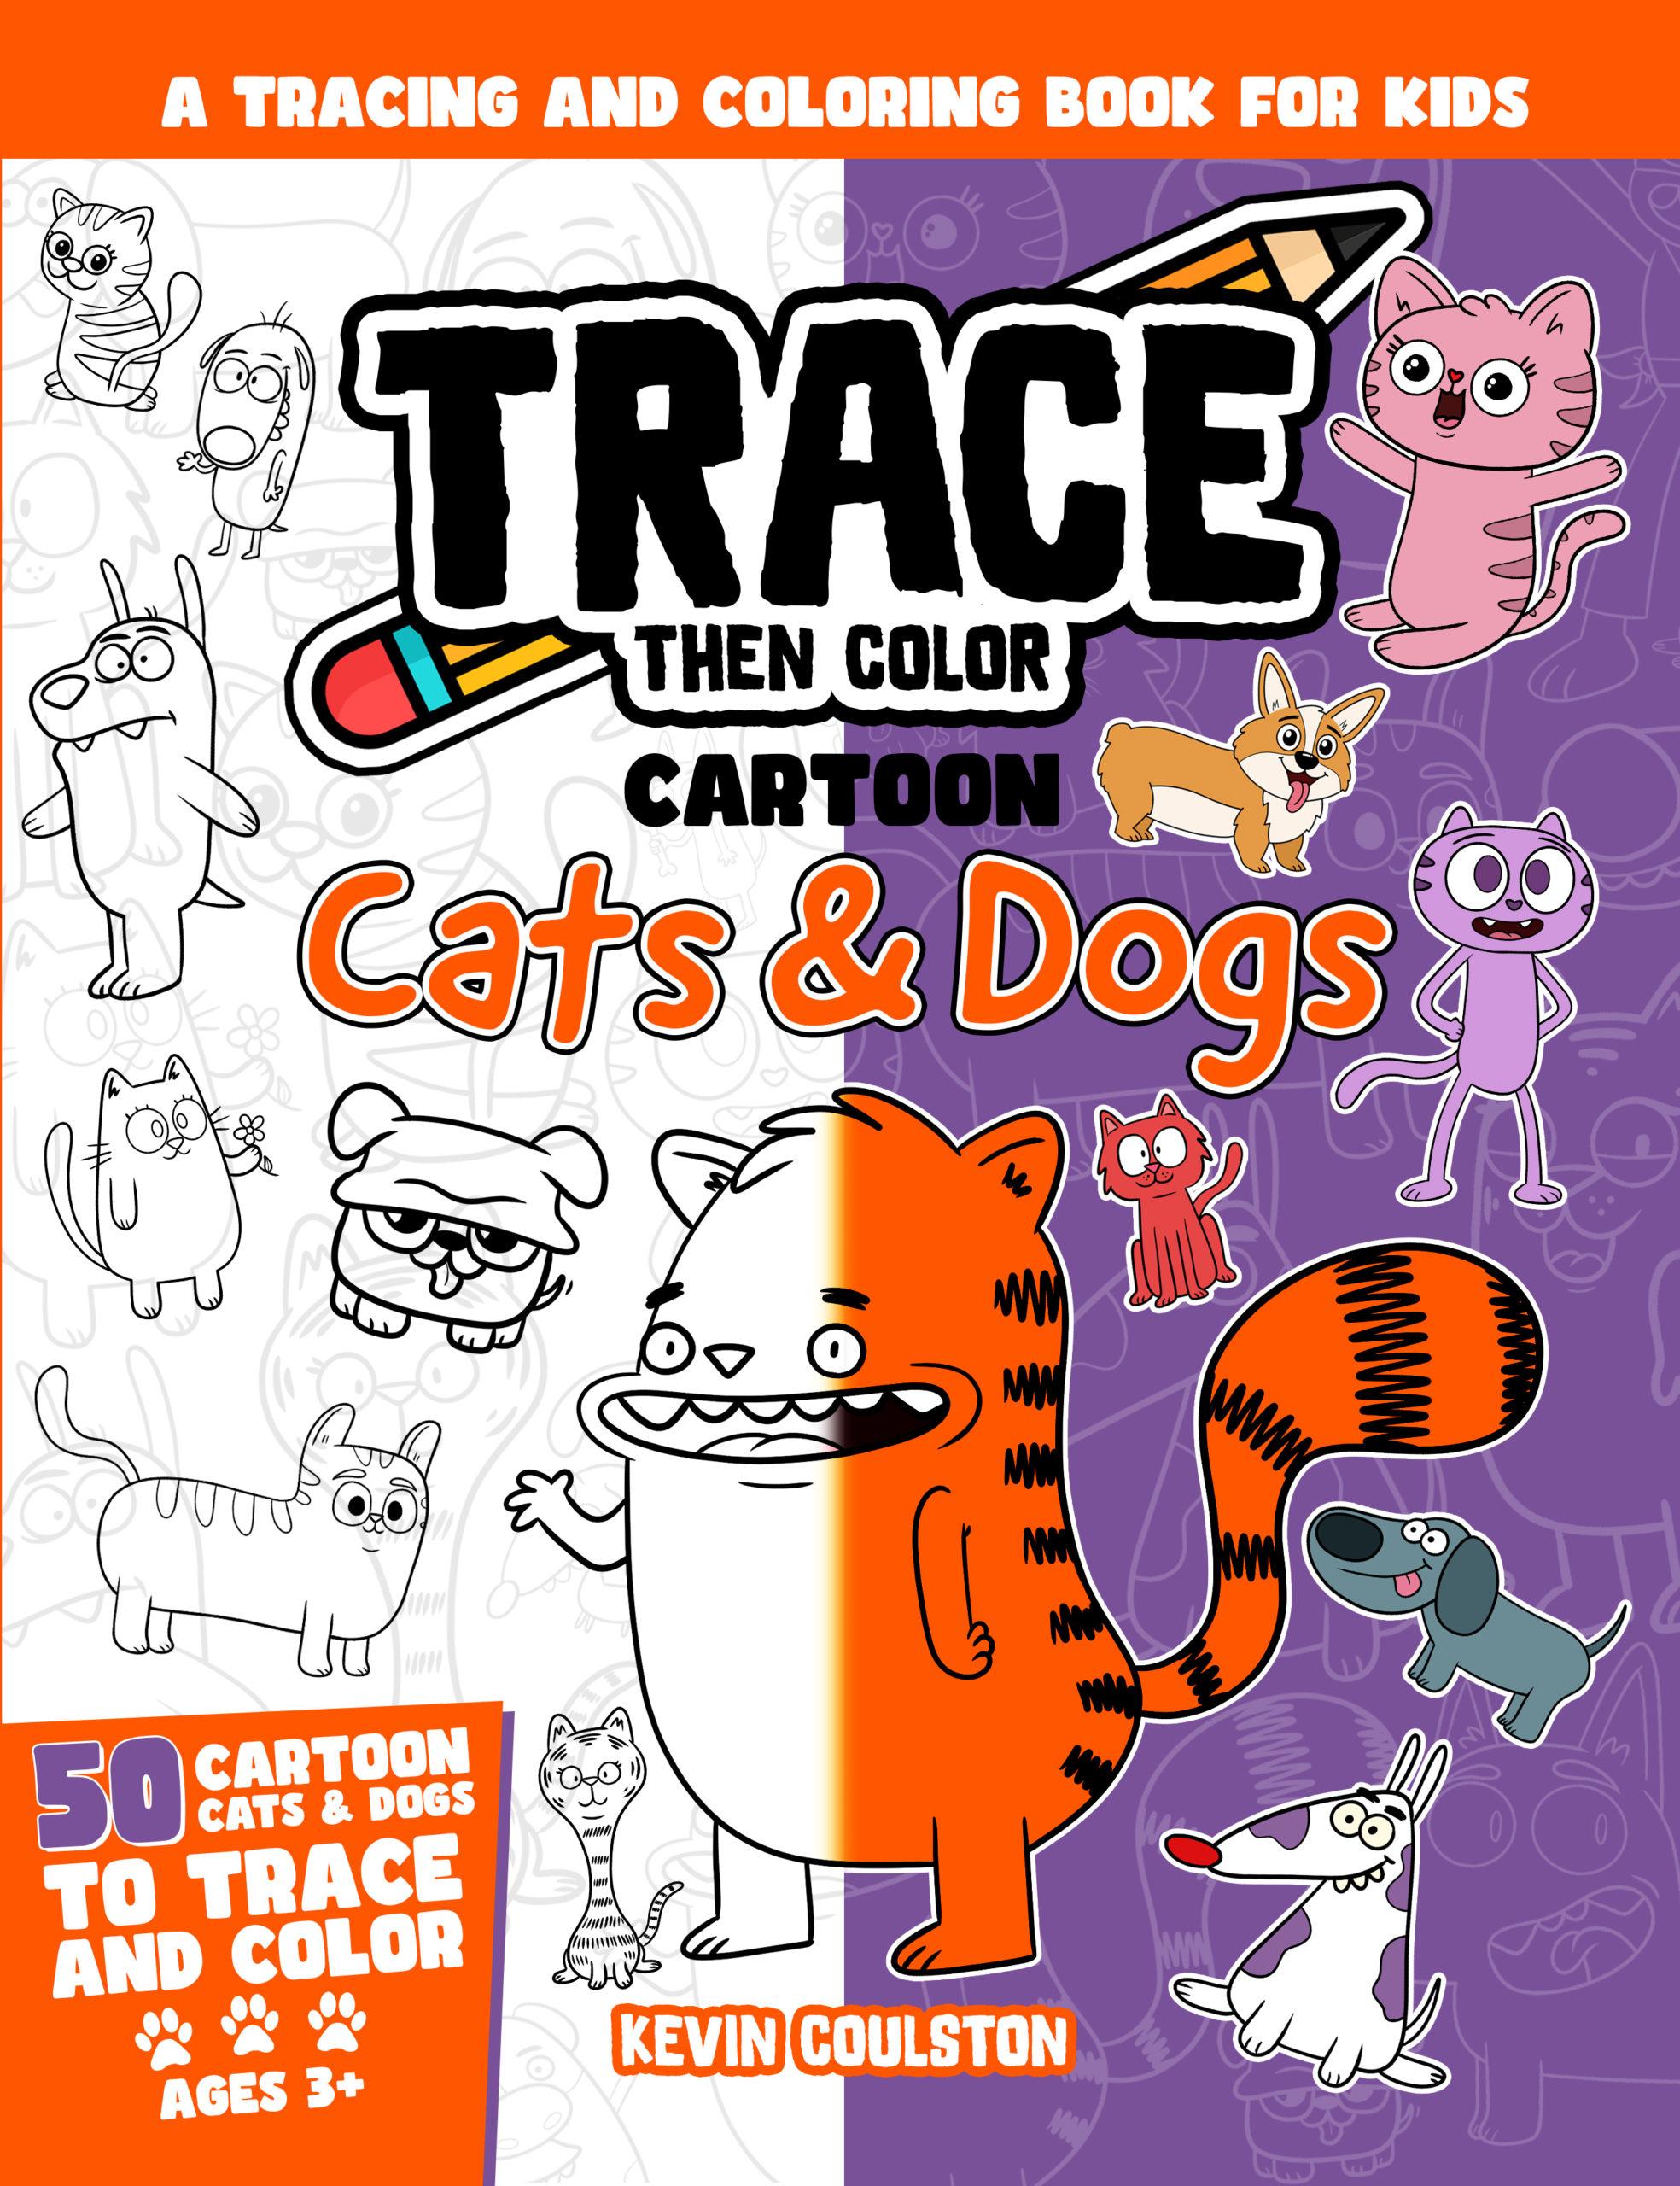 Trace Then Color: Cats & Dogs